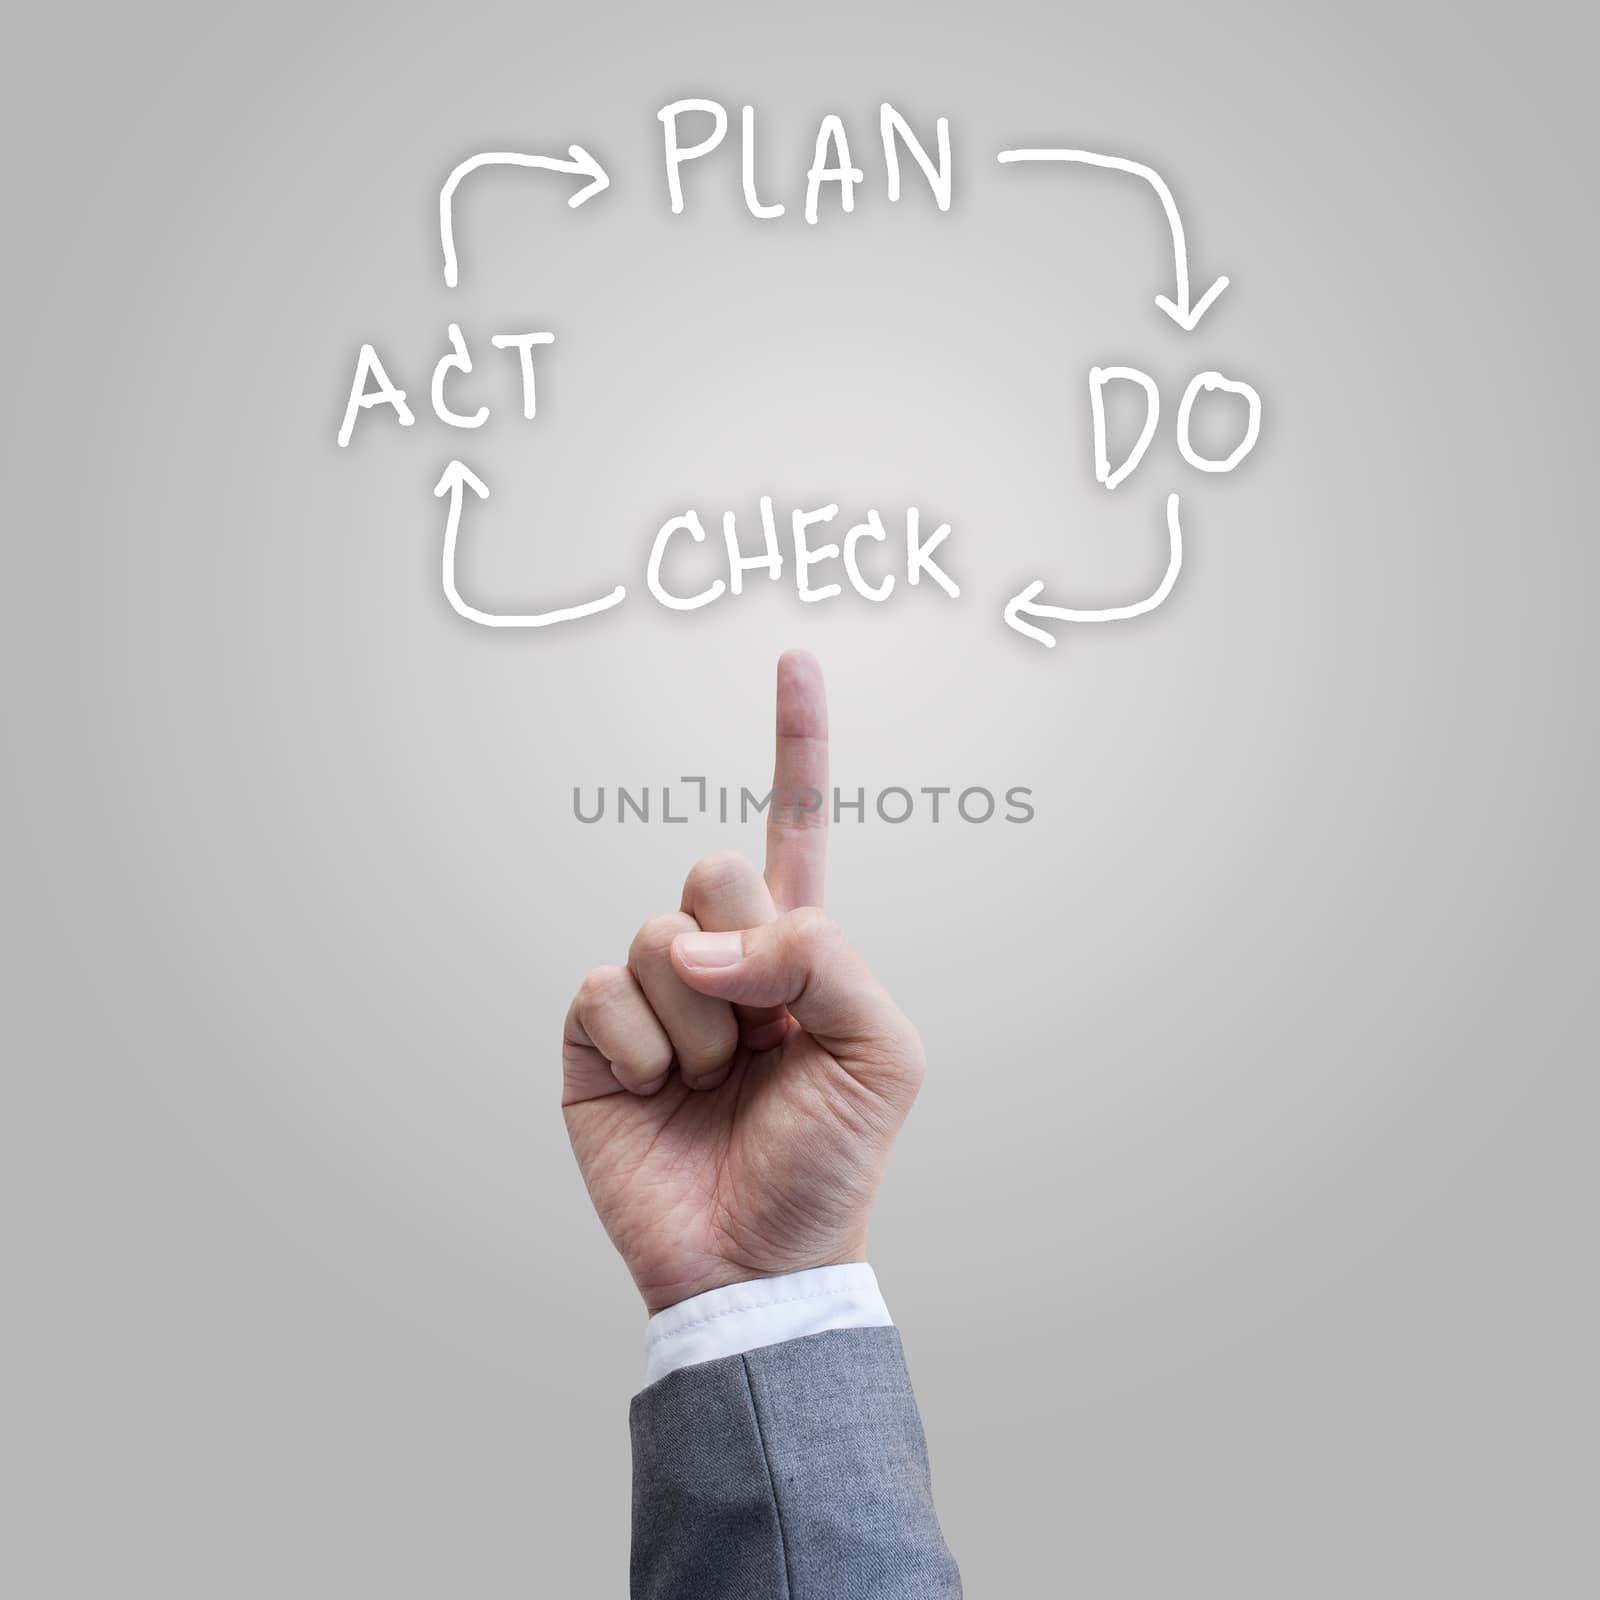 Plan Do Check Act software developtment by 2nix